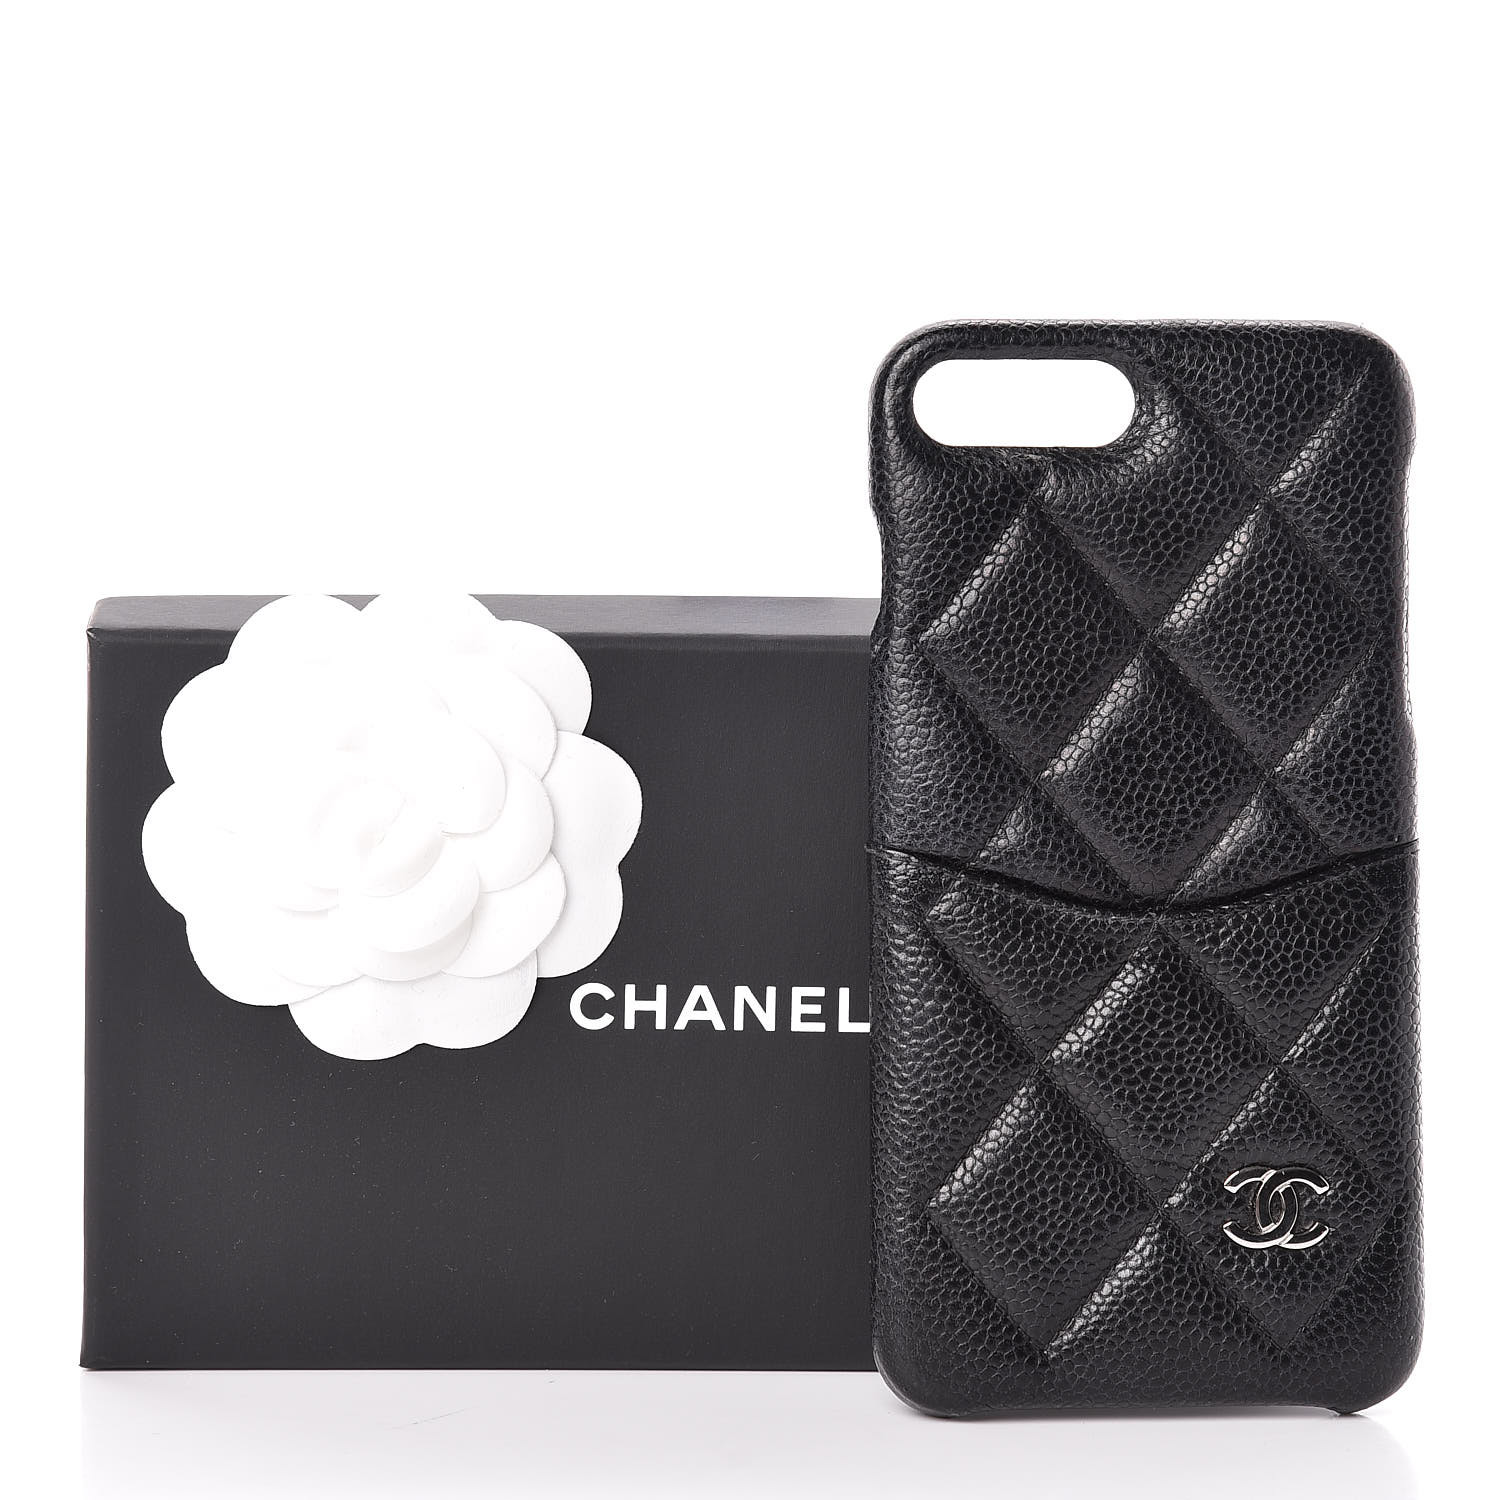 Chanel Caviar Quilted Iphone 8 Plus Coco Tech Case Black 4419 Fashionphile